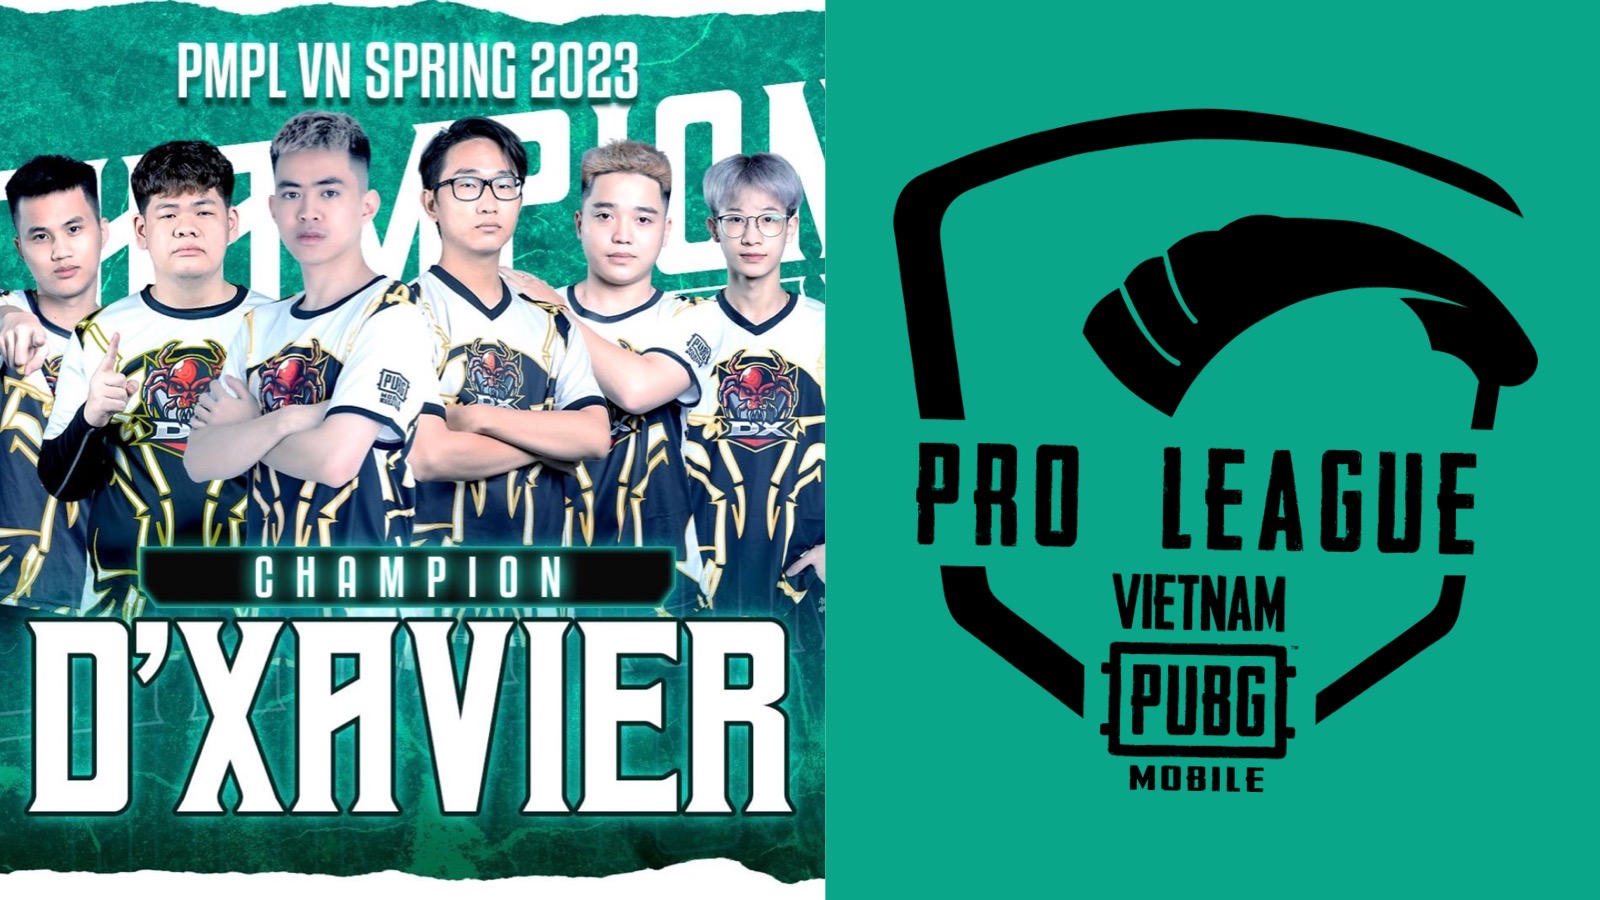 D’Xavier clinches PMPL Vietnam Spring 2023 title in a dominating display